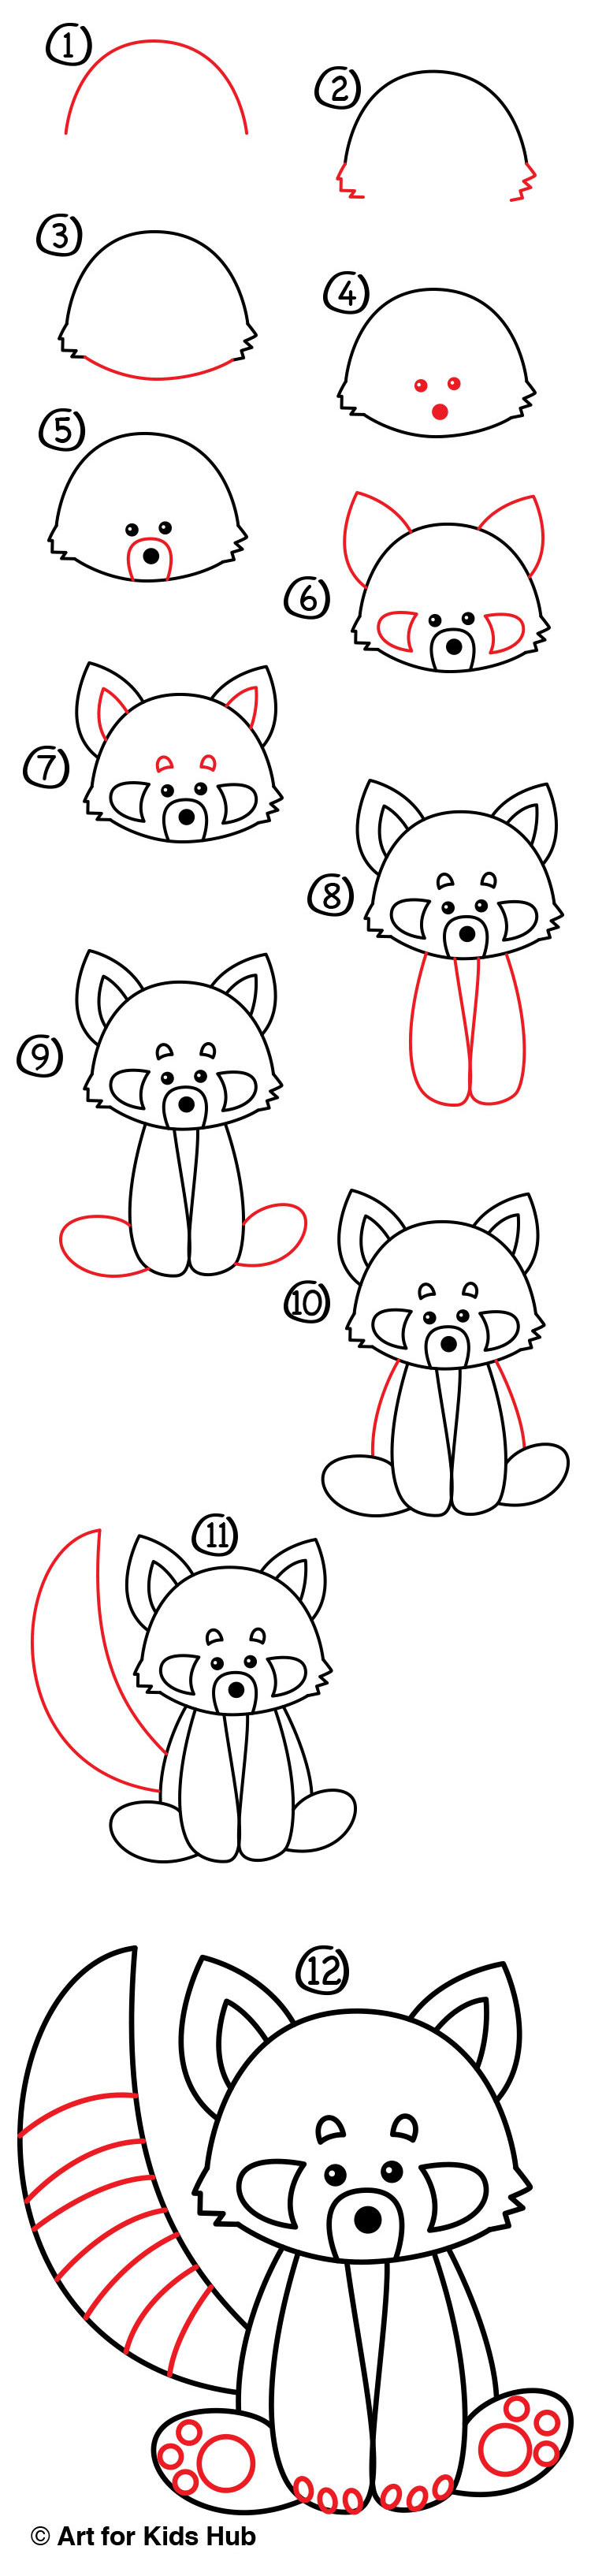 How To Draw A Red Panda - Art For Kids Hub